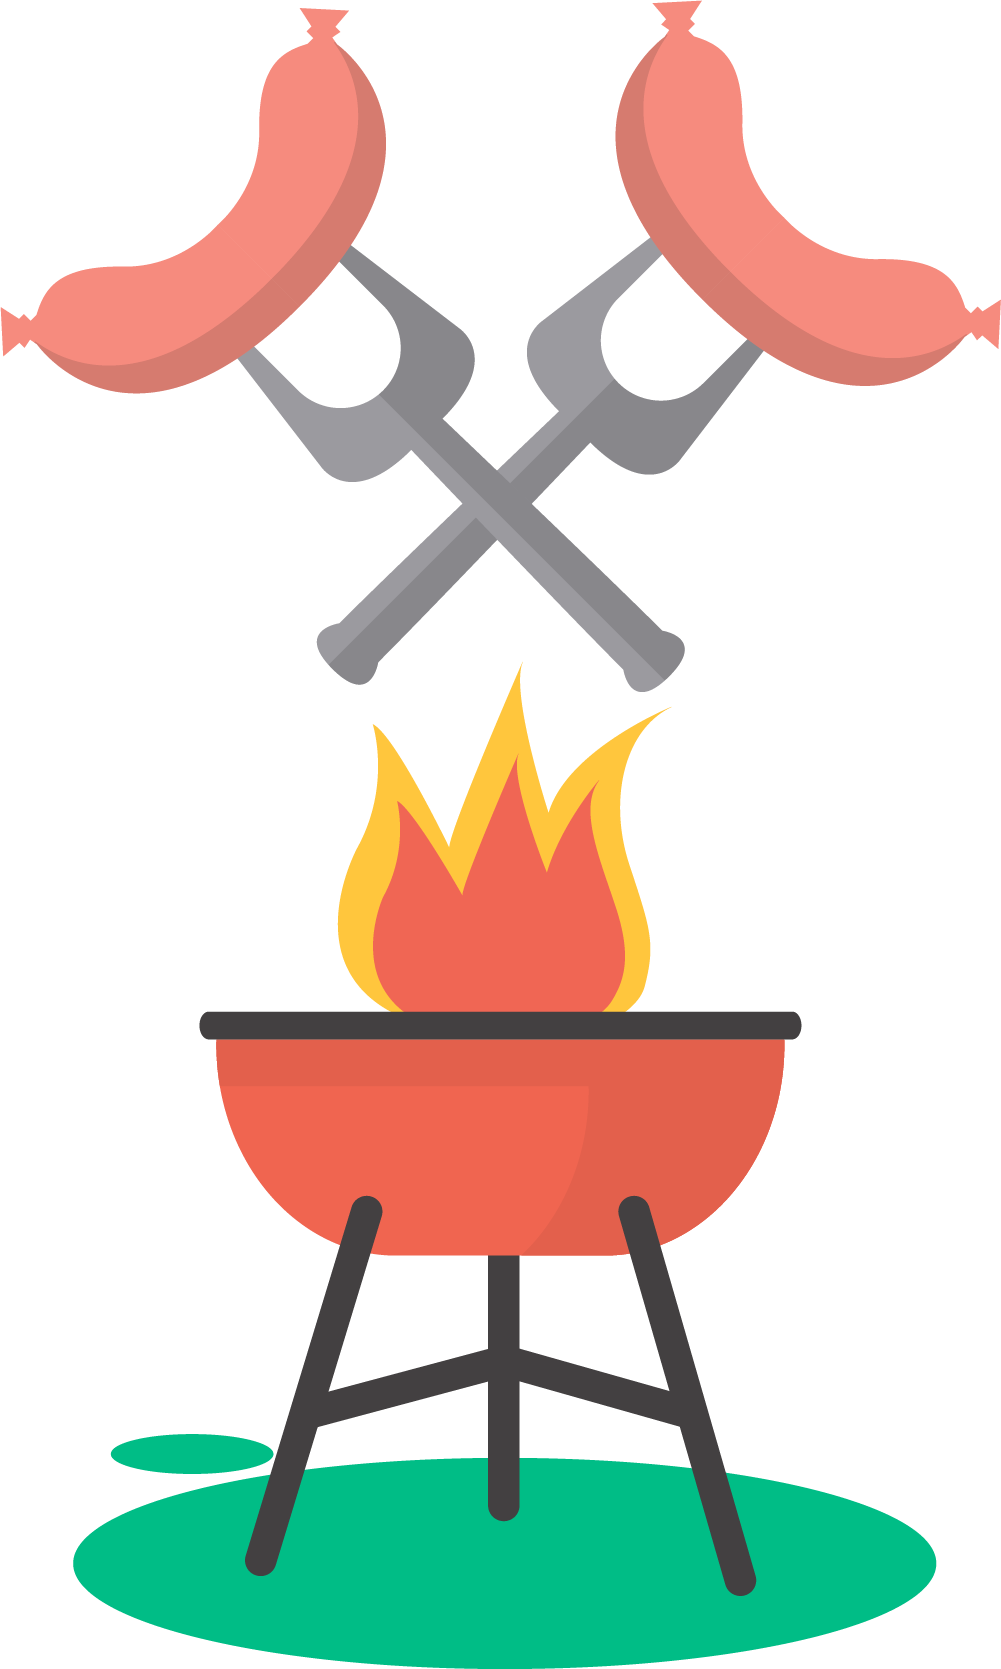 Grill clipart steak. Barbecue picnic grilling grilled